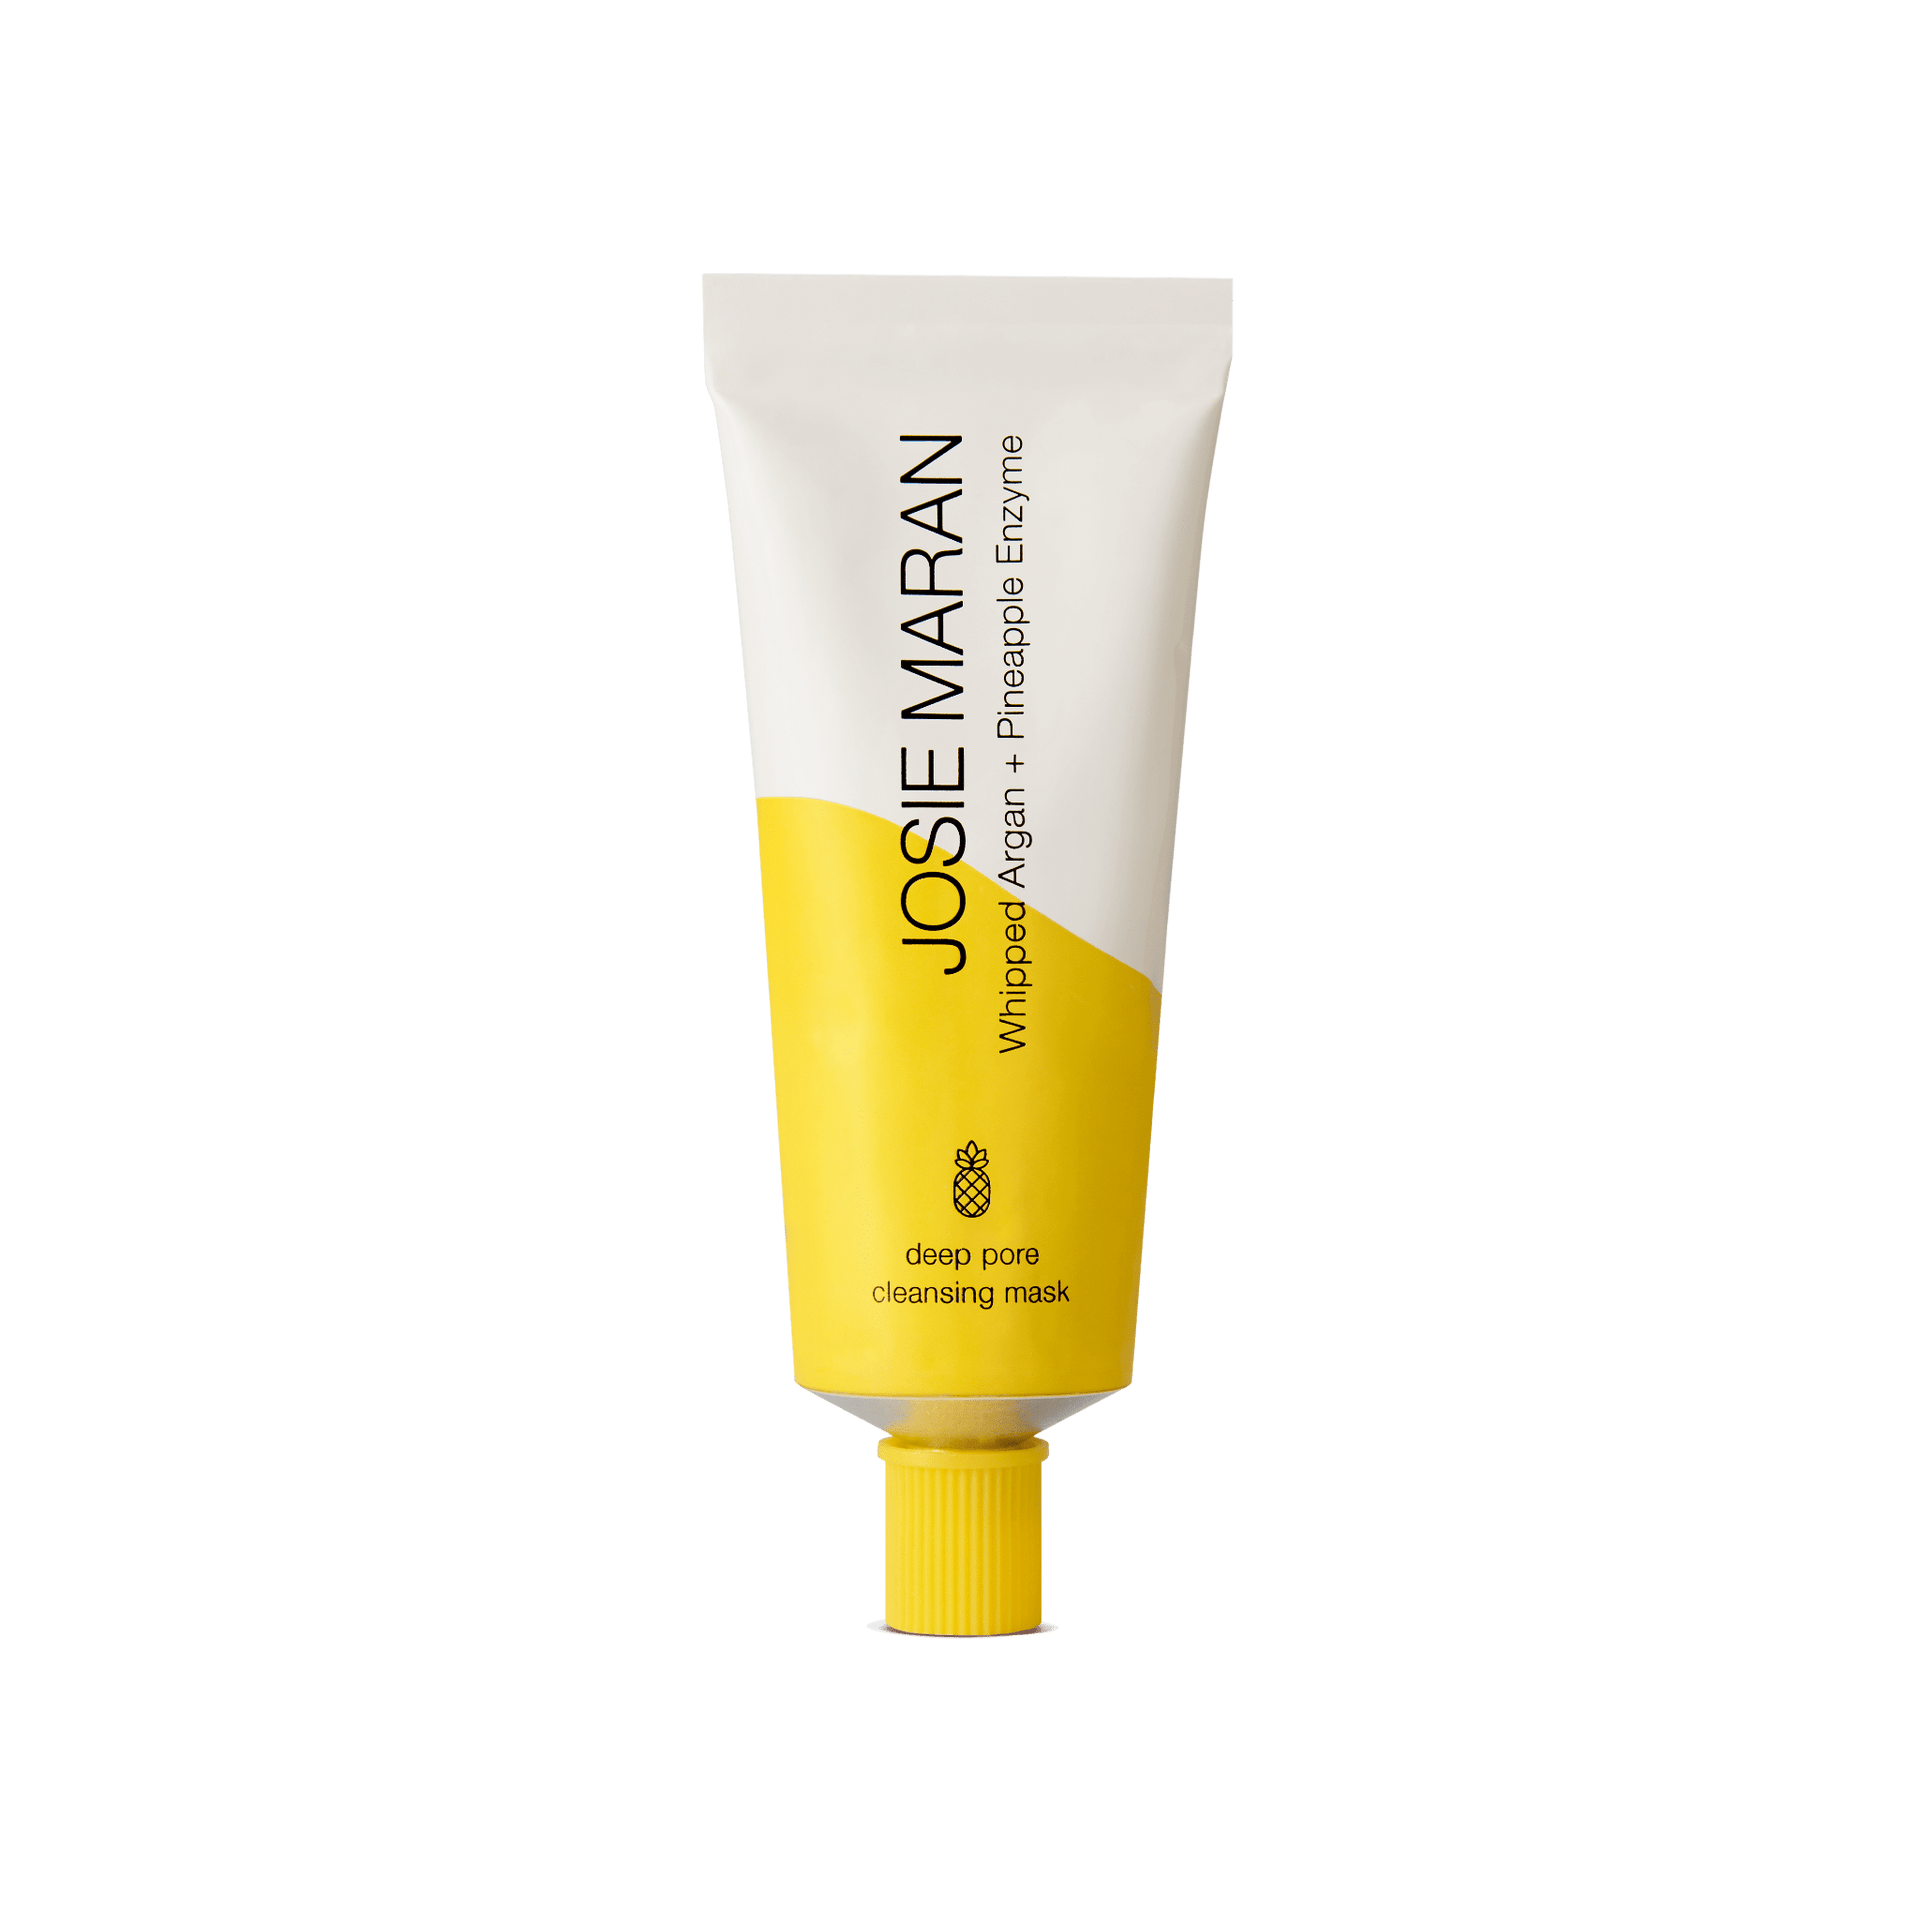 Whipped Argan + Pineapple Enzyme Deep Pore Cleansing Mask